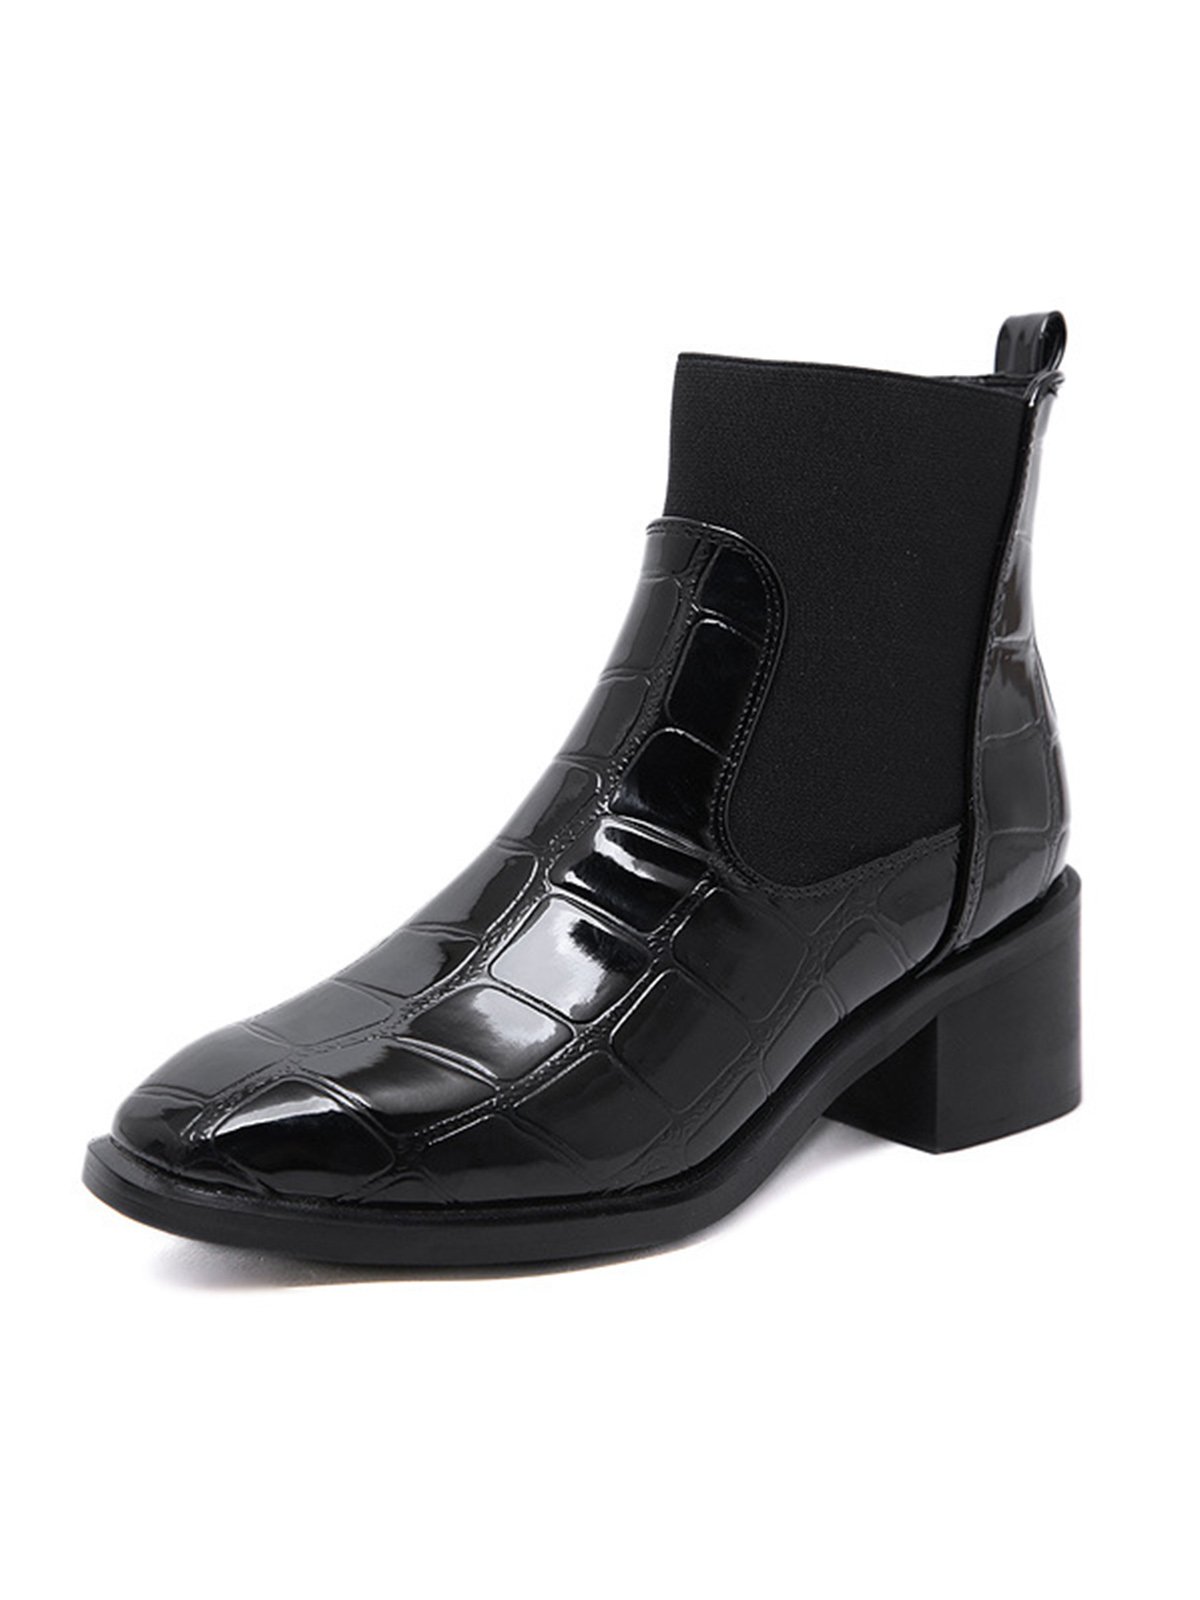 Croc-embossed Patent Leather Paneled Slip On Boots